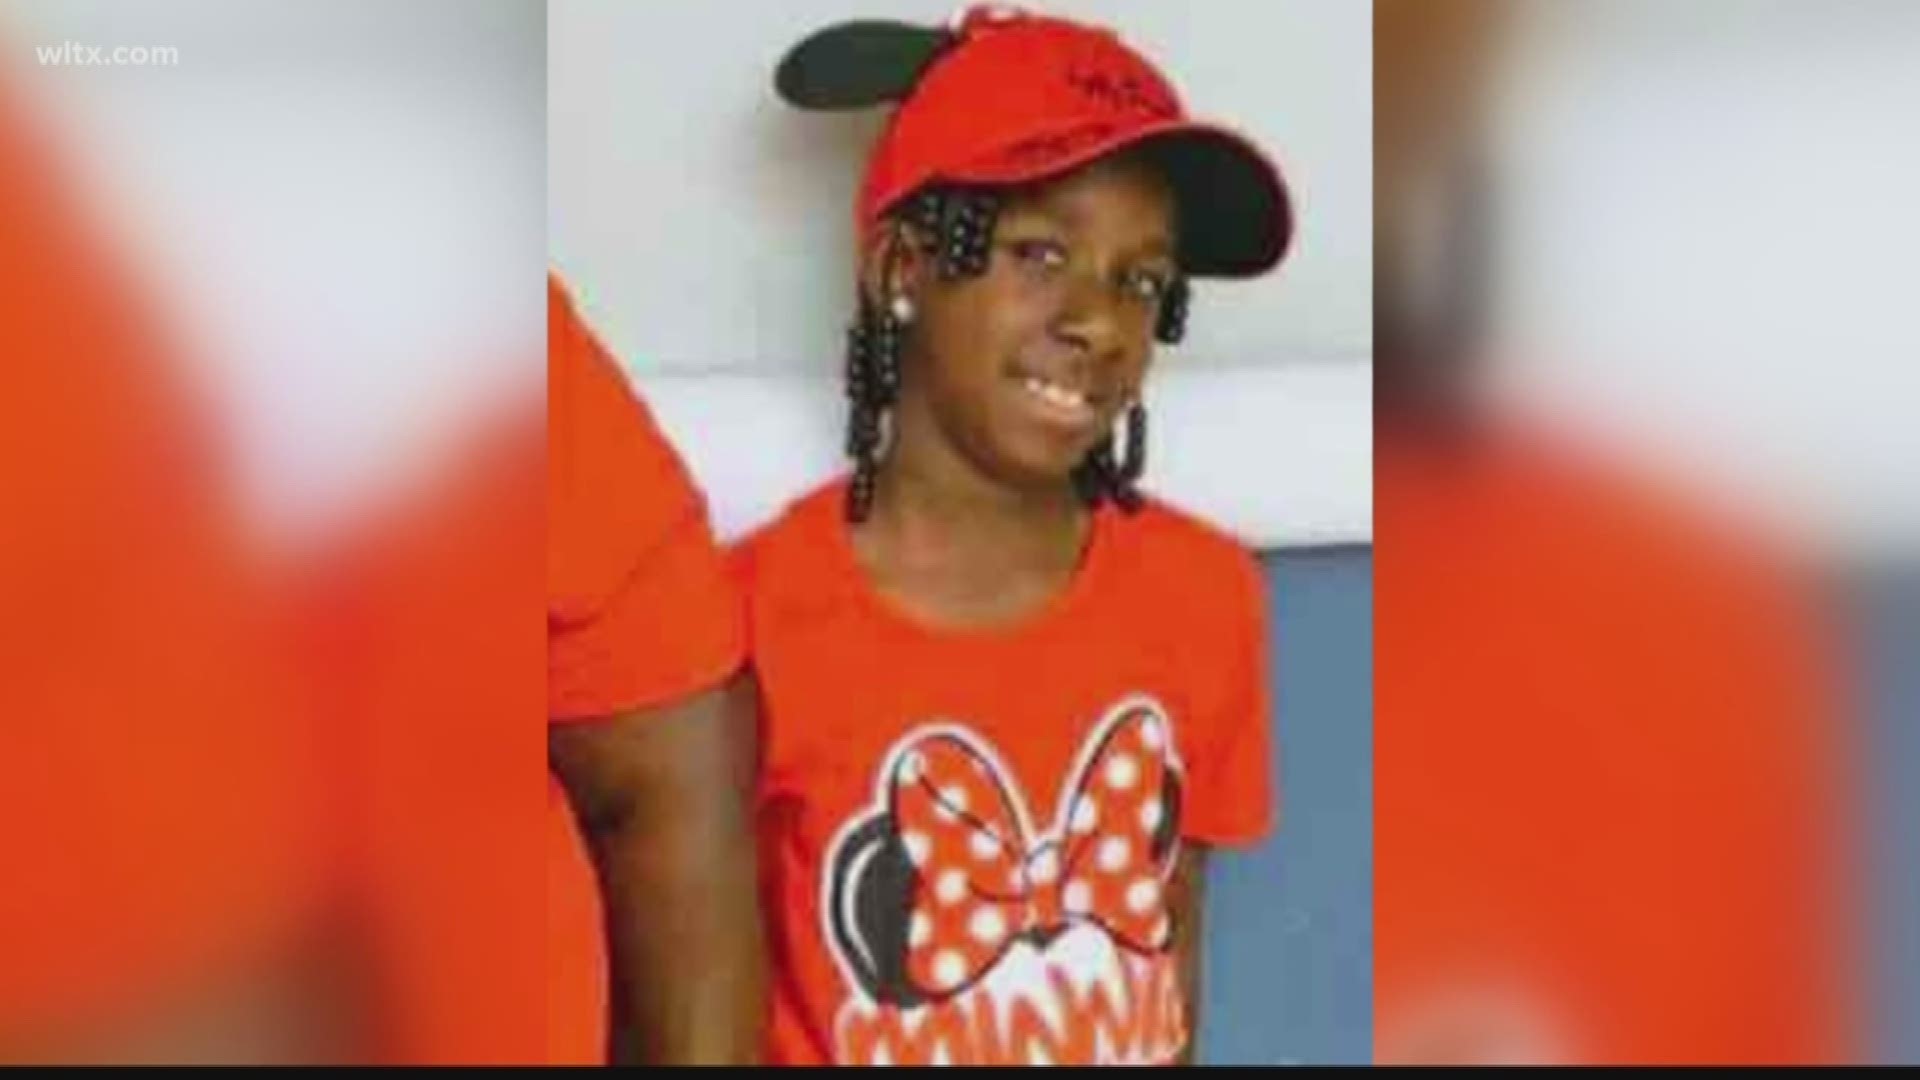 Raniya Wright, 10, was a fifth grader who died after a fight at a Colleton county school